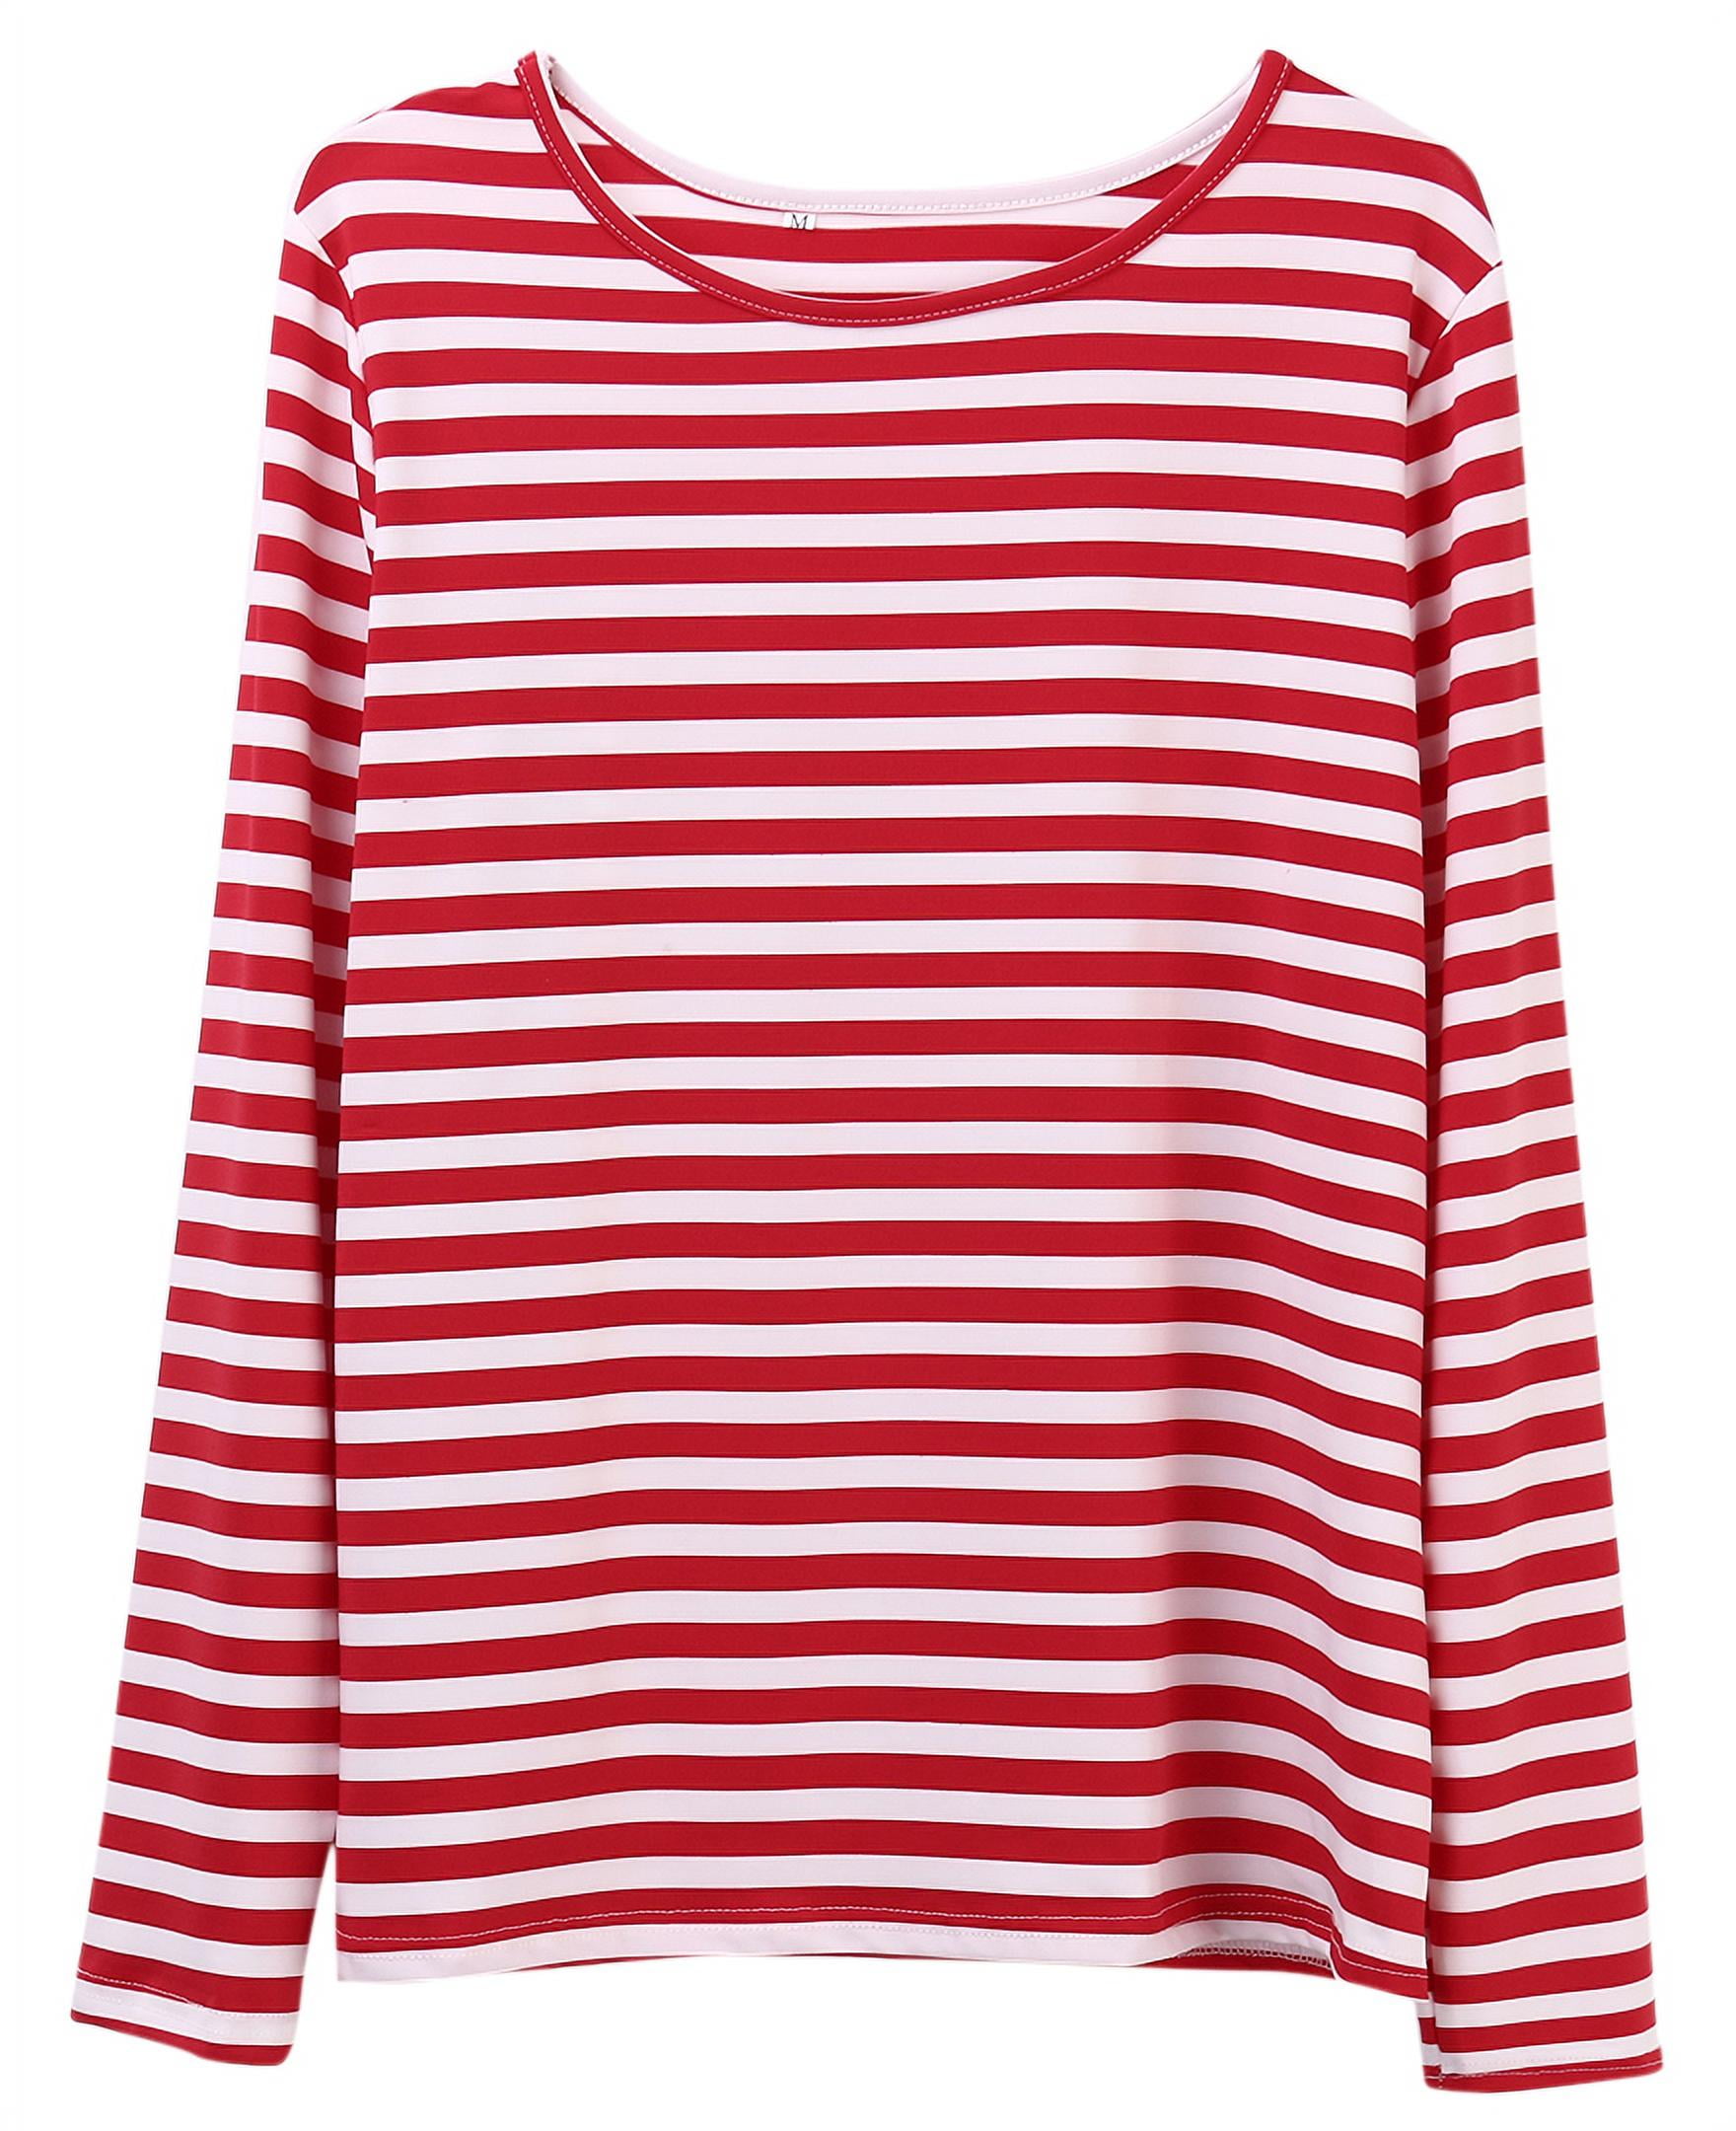 Sprifallbaby Women Red White Striped Casual Tops Long Sleeve Round Neck ...